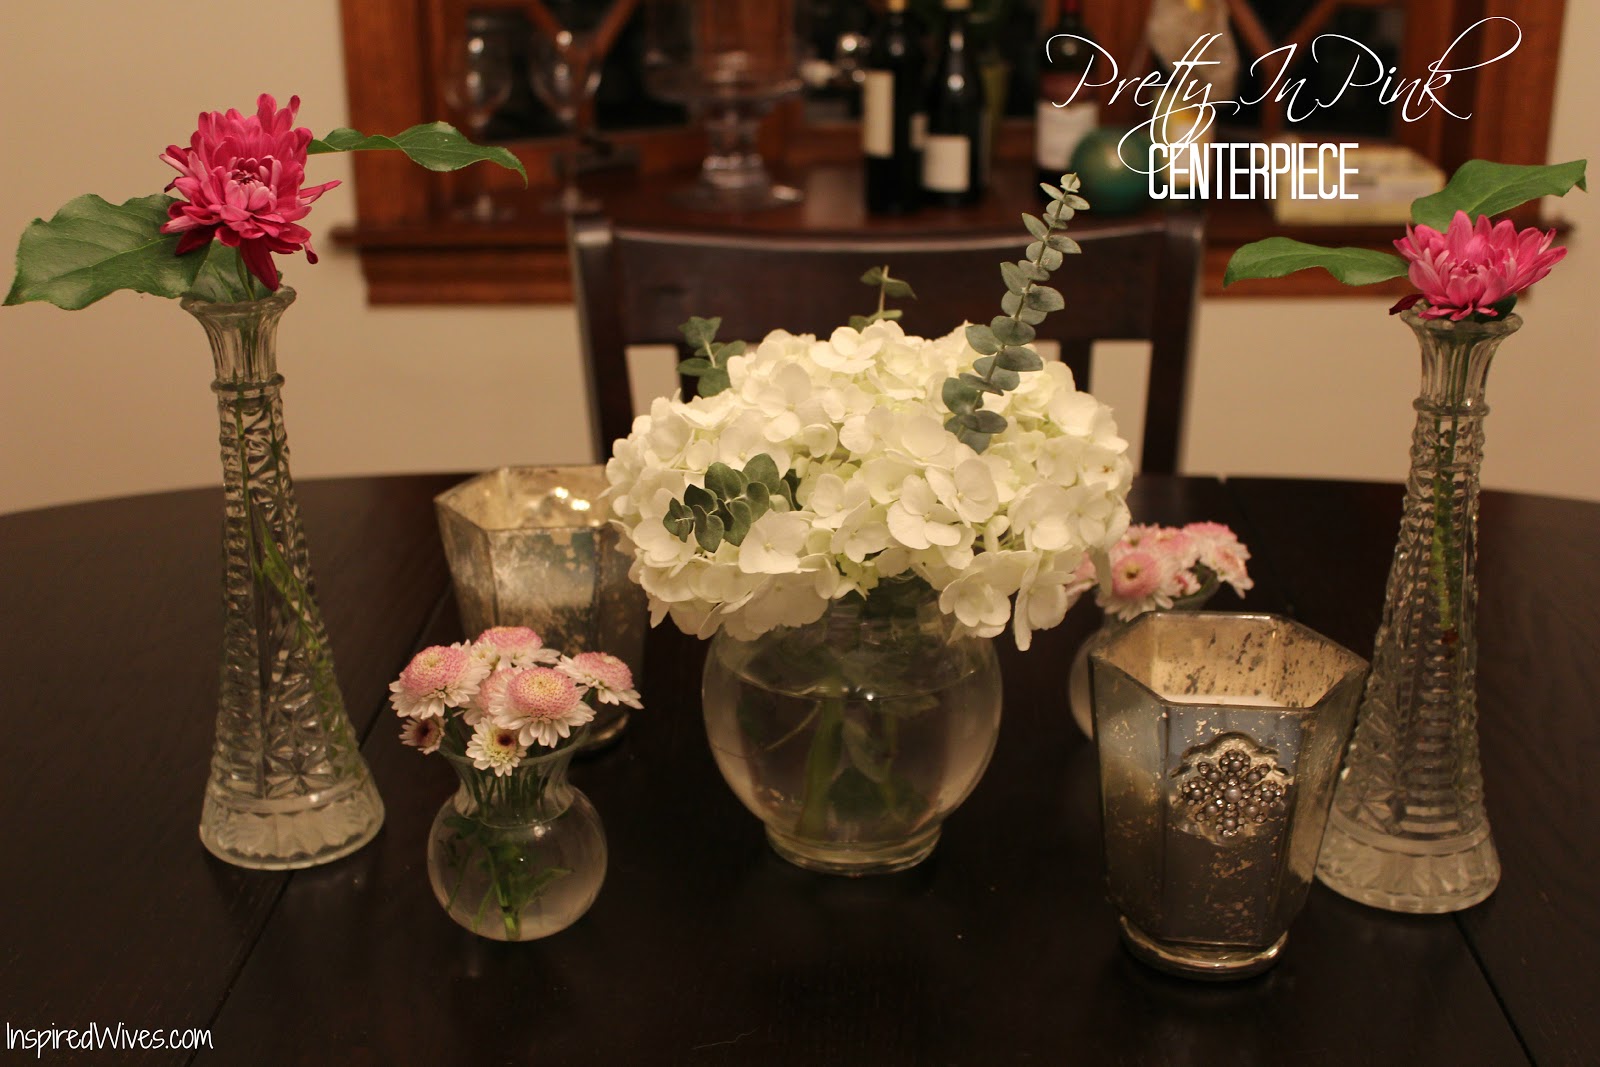 Inspired I Dos: 7 Dinner Party Centerpiece Ideas